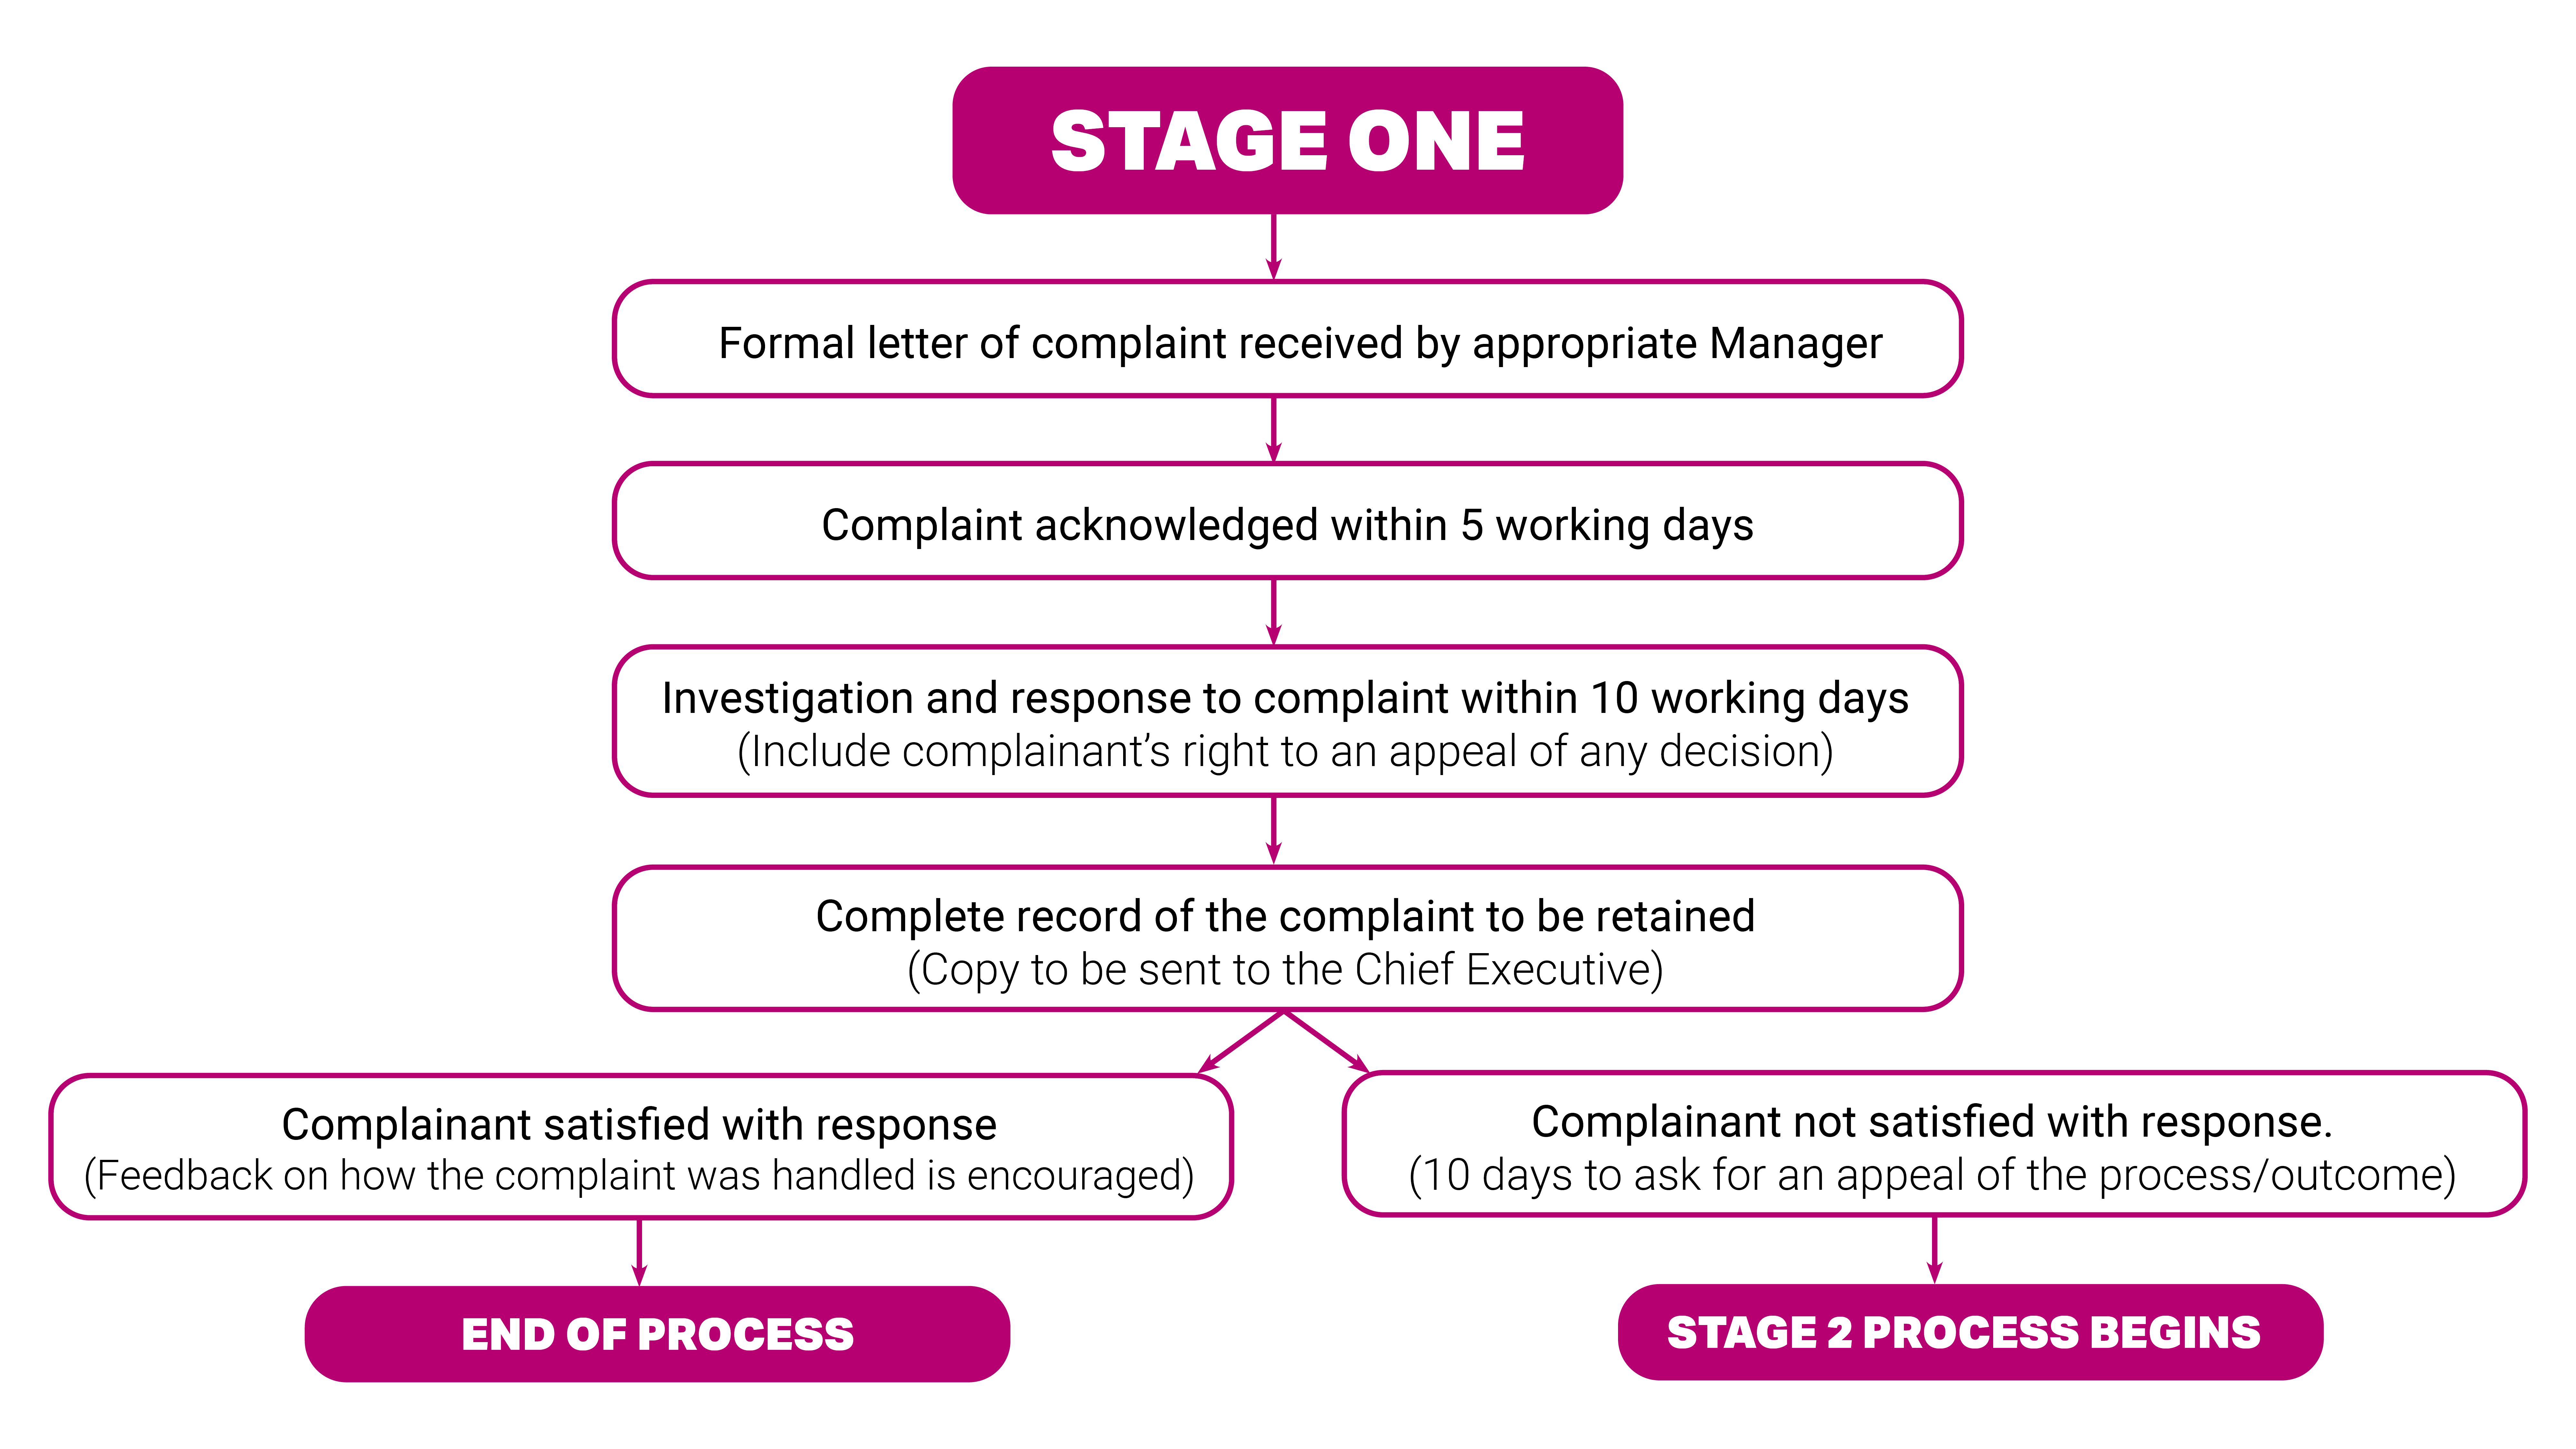 Flow chart showing process of Stage One complaints procedure. Step 1, a formal letter of complaint received by appropriate Manager. Step 2, the complaint is acknowledged within 5 working days. Step 3, there is an investigation and response to complaint within 10 working days (include complainant’s right to an appeal of any decision). Step 4, a complete record of the complaint to be retained (copy to be sent to the Chief Executive). If the complainant is satisfied with response (any feedback on how the complaint was handled is to be encouraged) then the process will end. If the complainant not satisfied with response (10 days to ask for an appeal of the process/outcome) then stage 2 process begins.